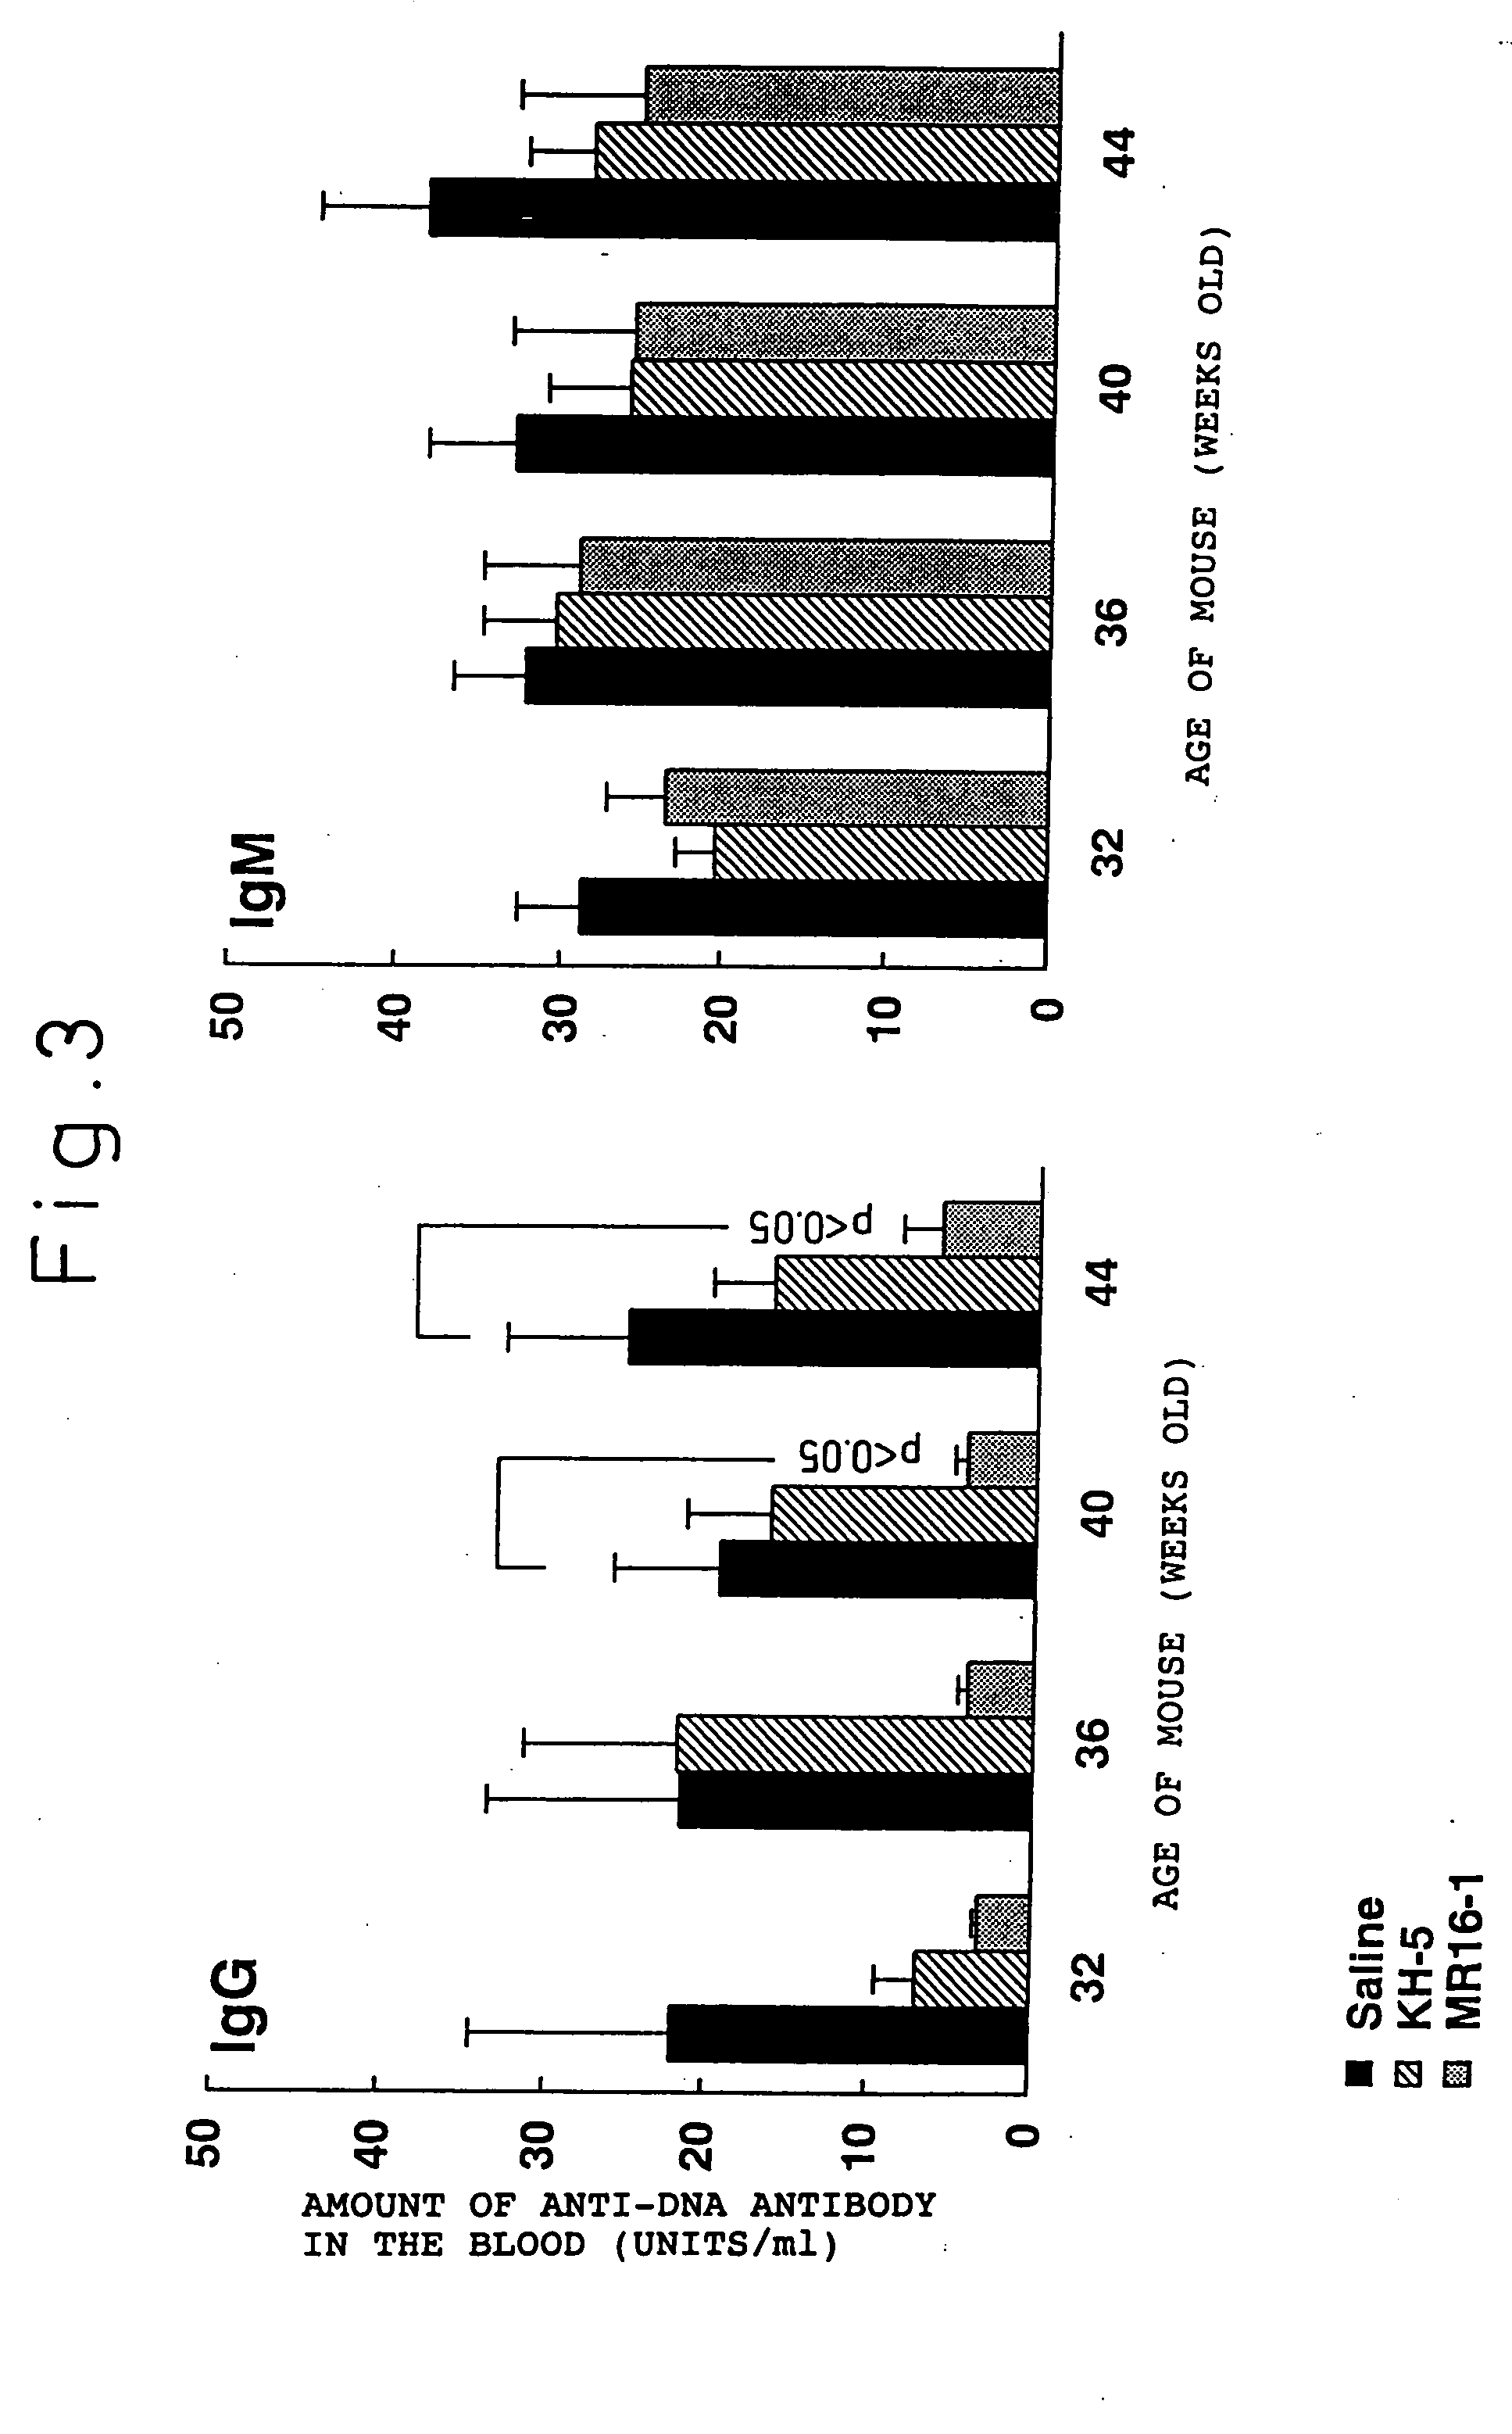 Preventive and/or therapeutic agent for systemic lupus erythematosus comprising anti-lL-6 receptor antibody as an active ingredient